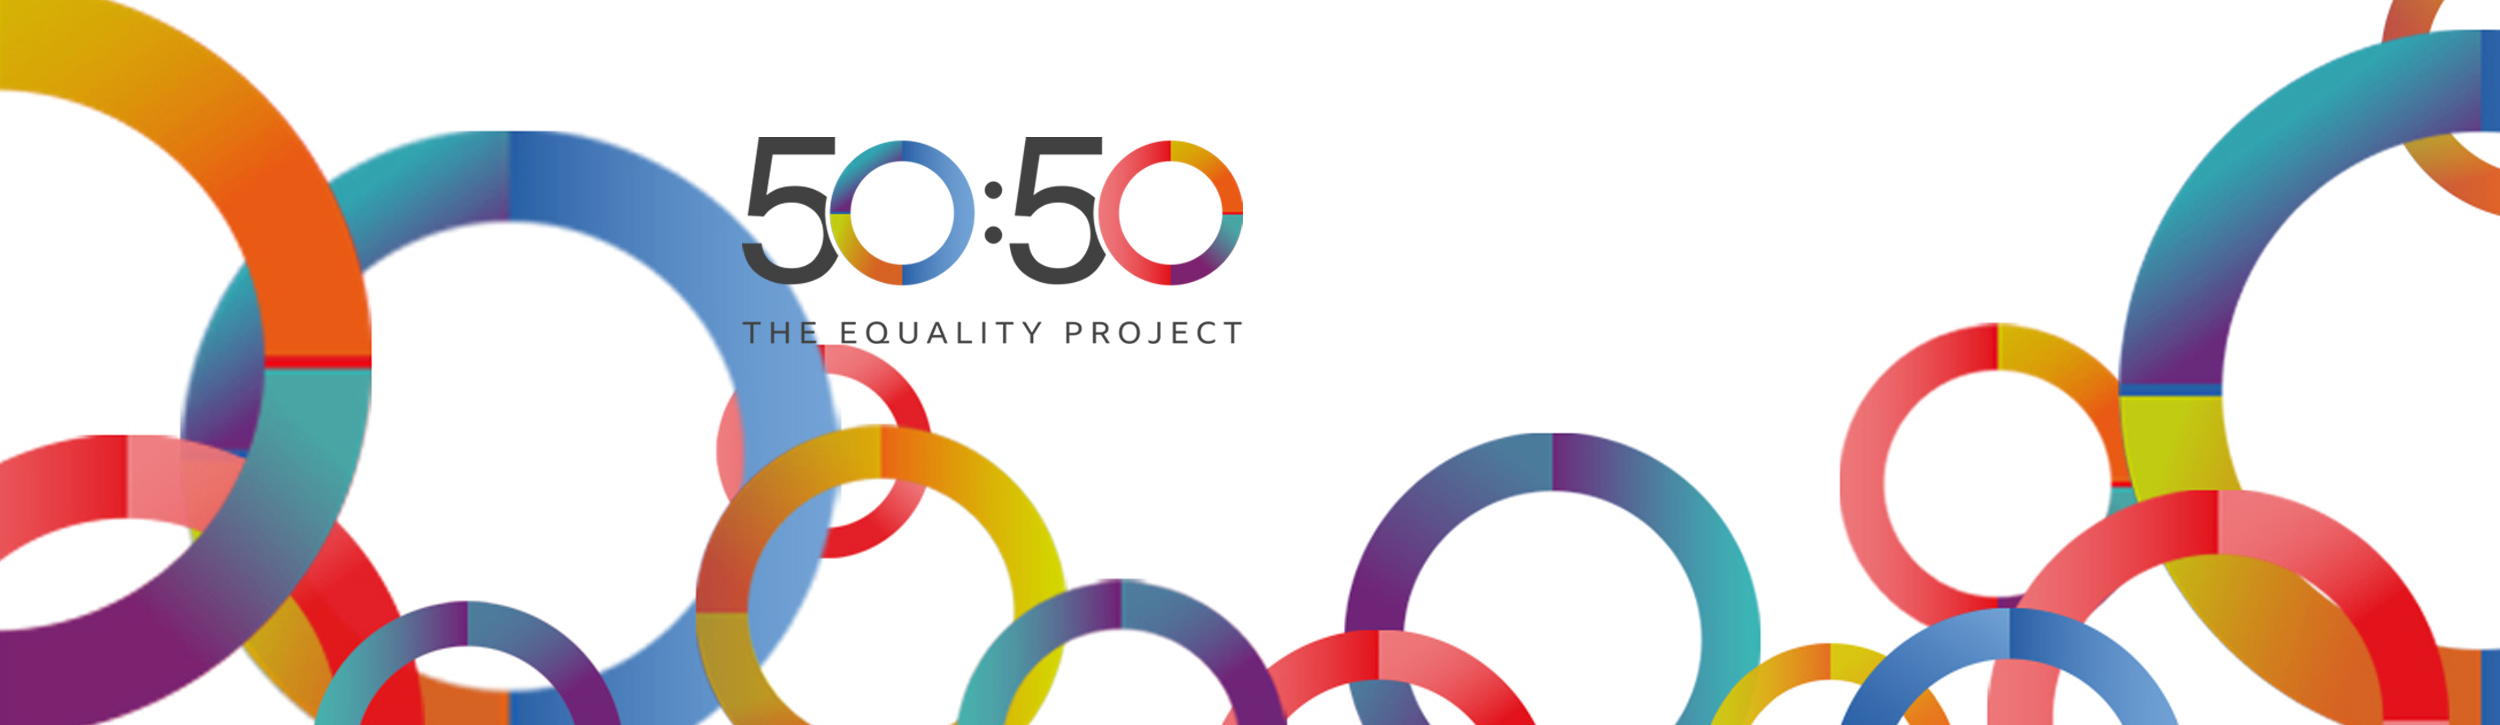 50:50 The Equality Project